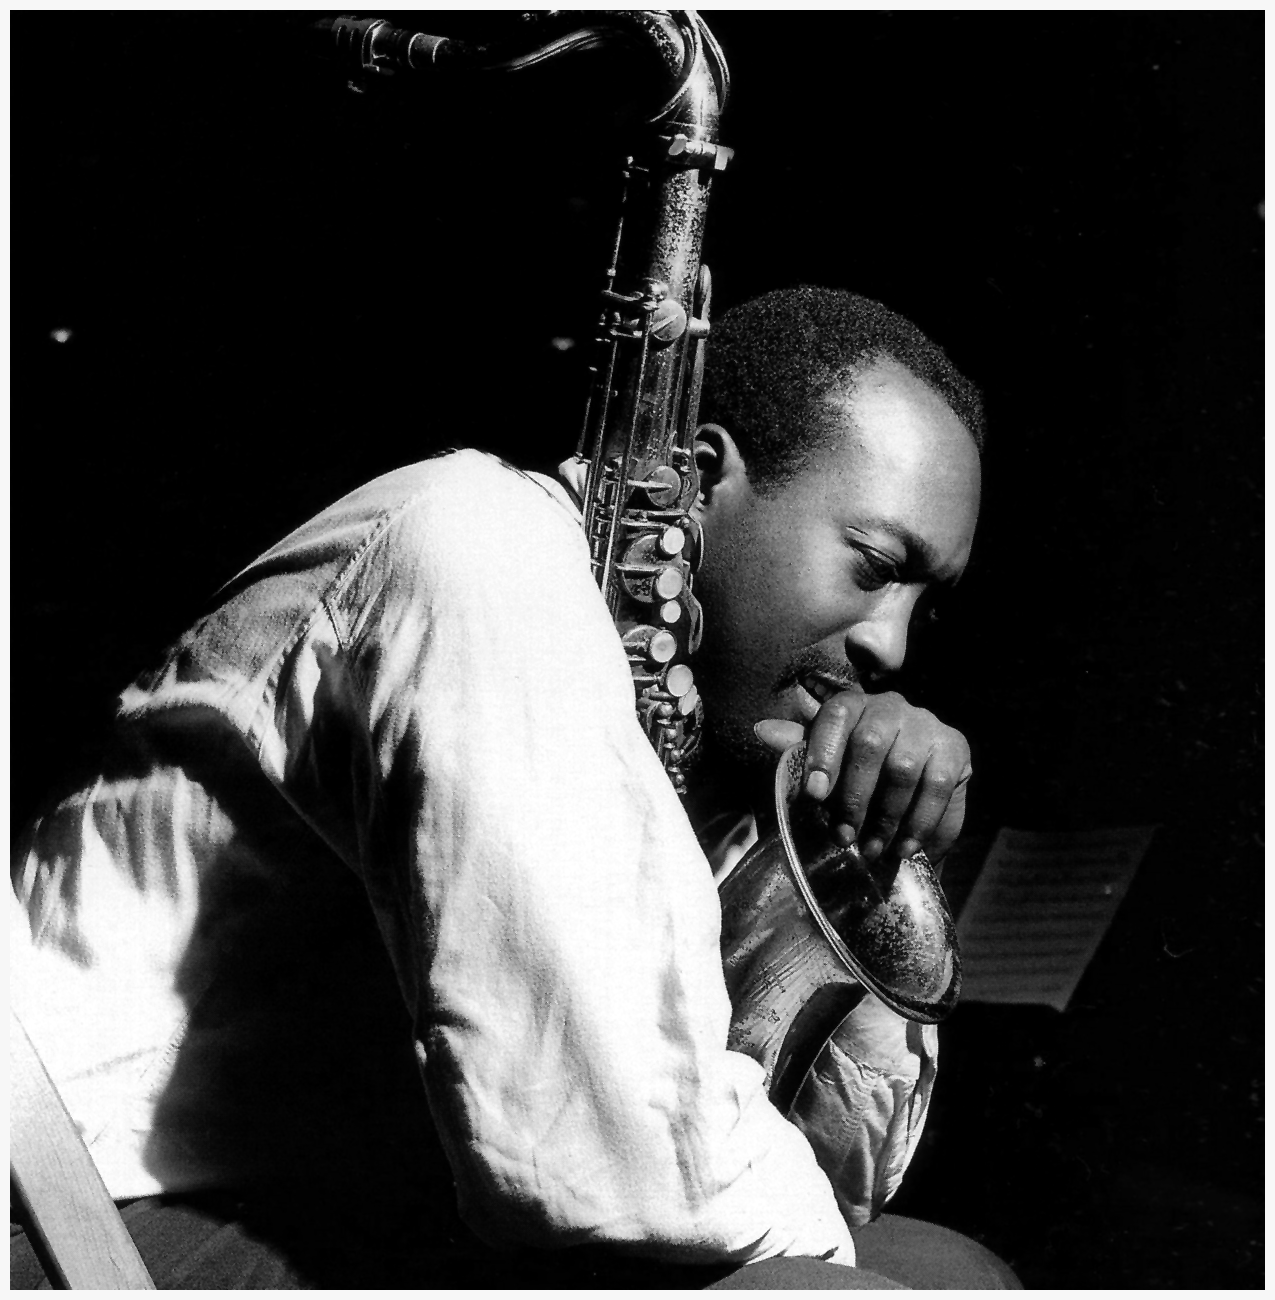 Hank Mobley from A Slice of The Top session, Englewood Cliffs March 18 1966 (photo by Francis Wolff) |